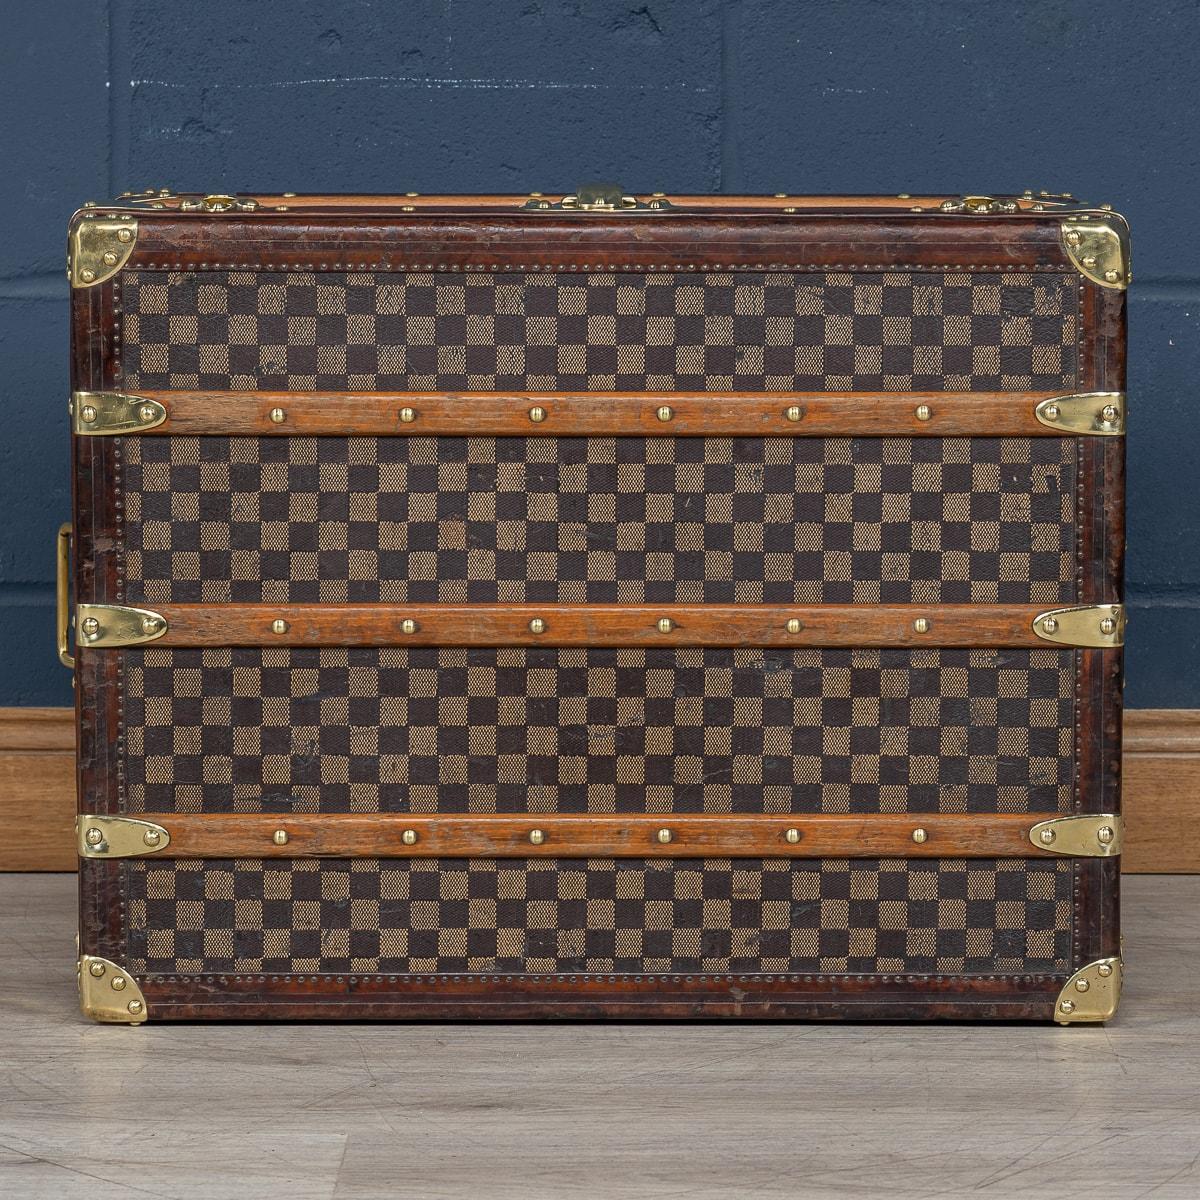 Brass Rare 19th Century Louis Vuitton Shirt Trunk In Damier Canvas, France c.1895 For Sale